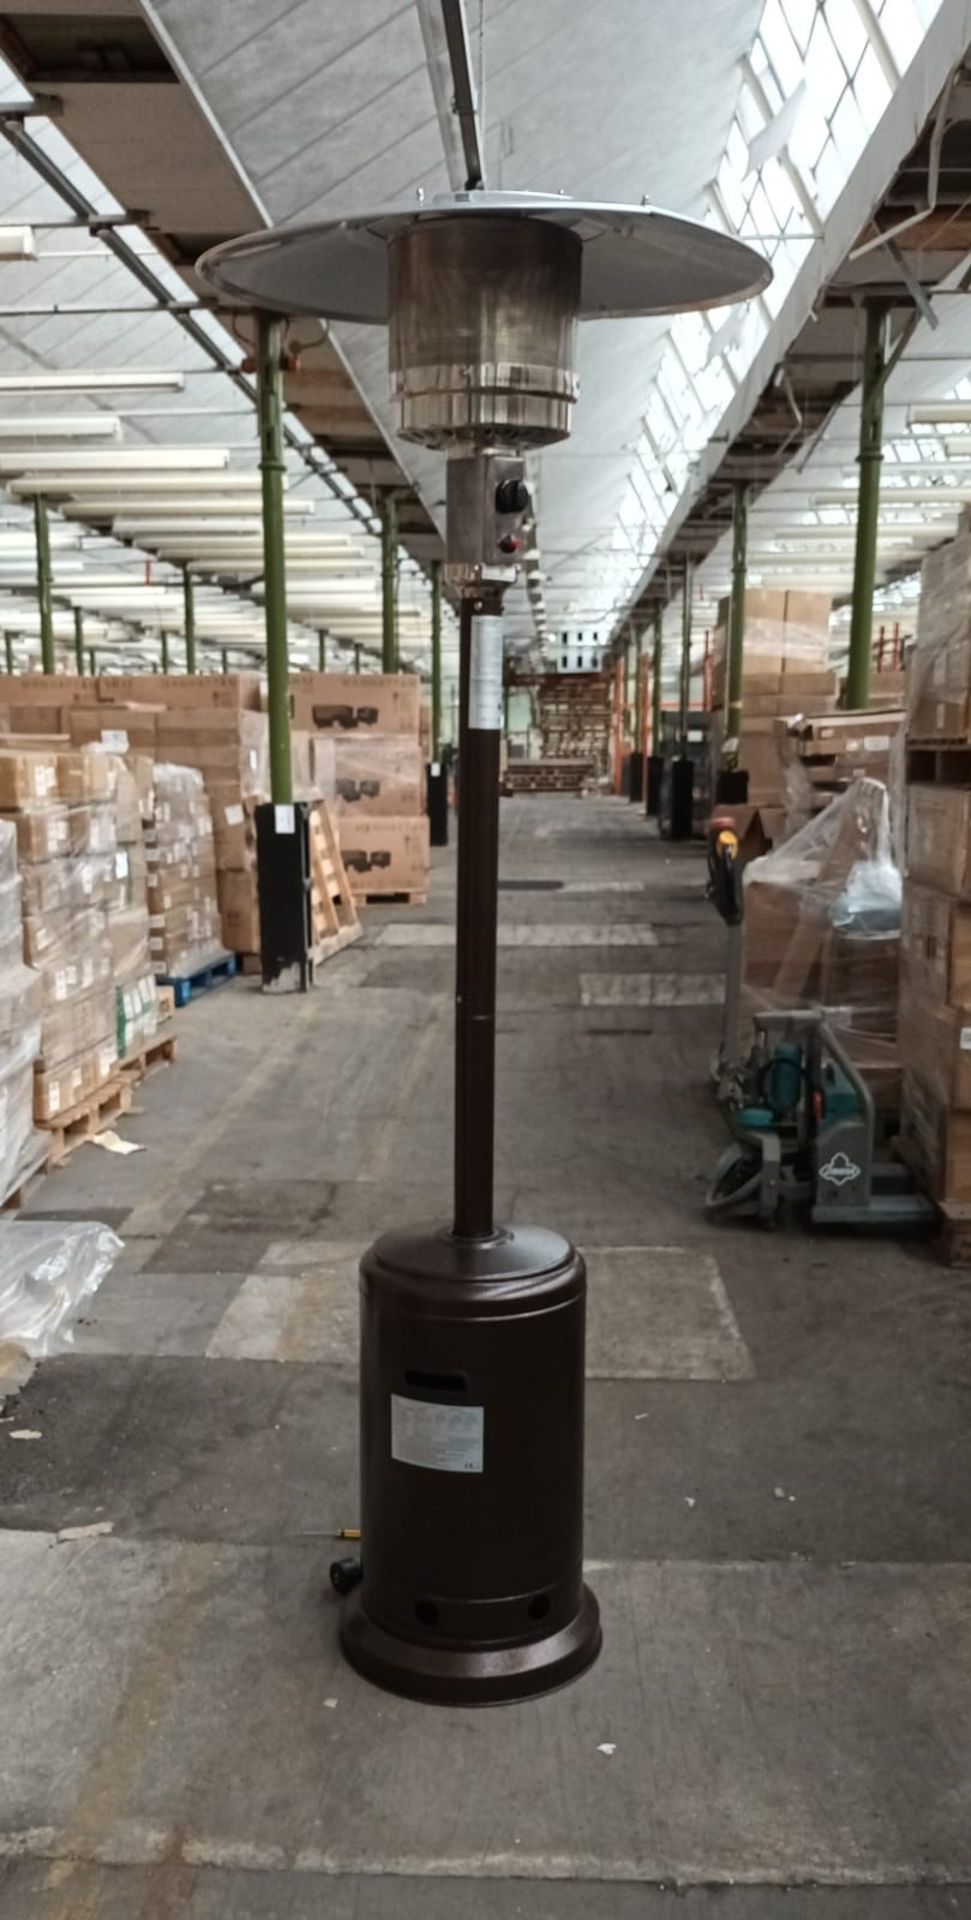 (L256) - 1 Pallet Containing Approx 6 Brand new black gas patio heaters